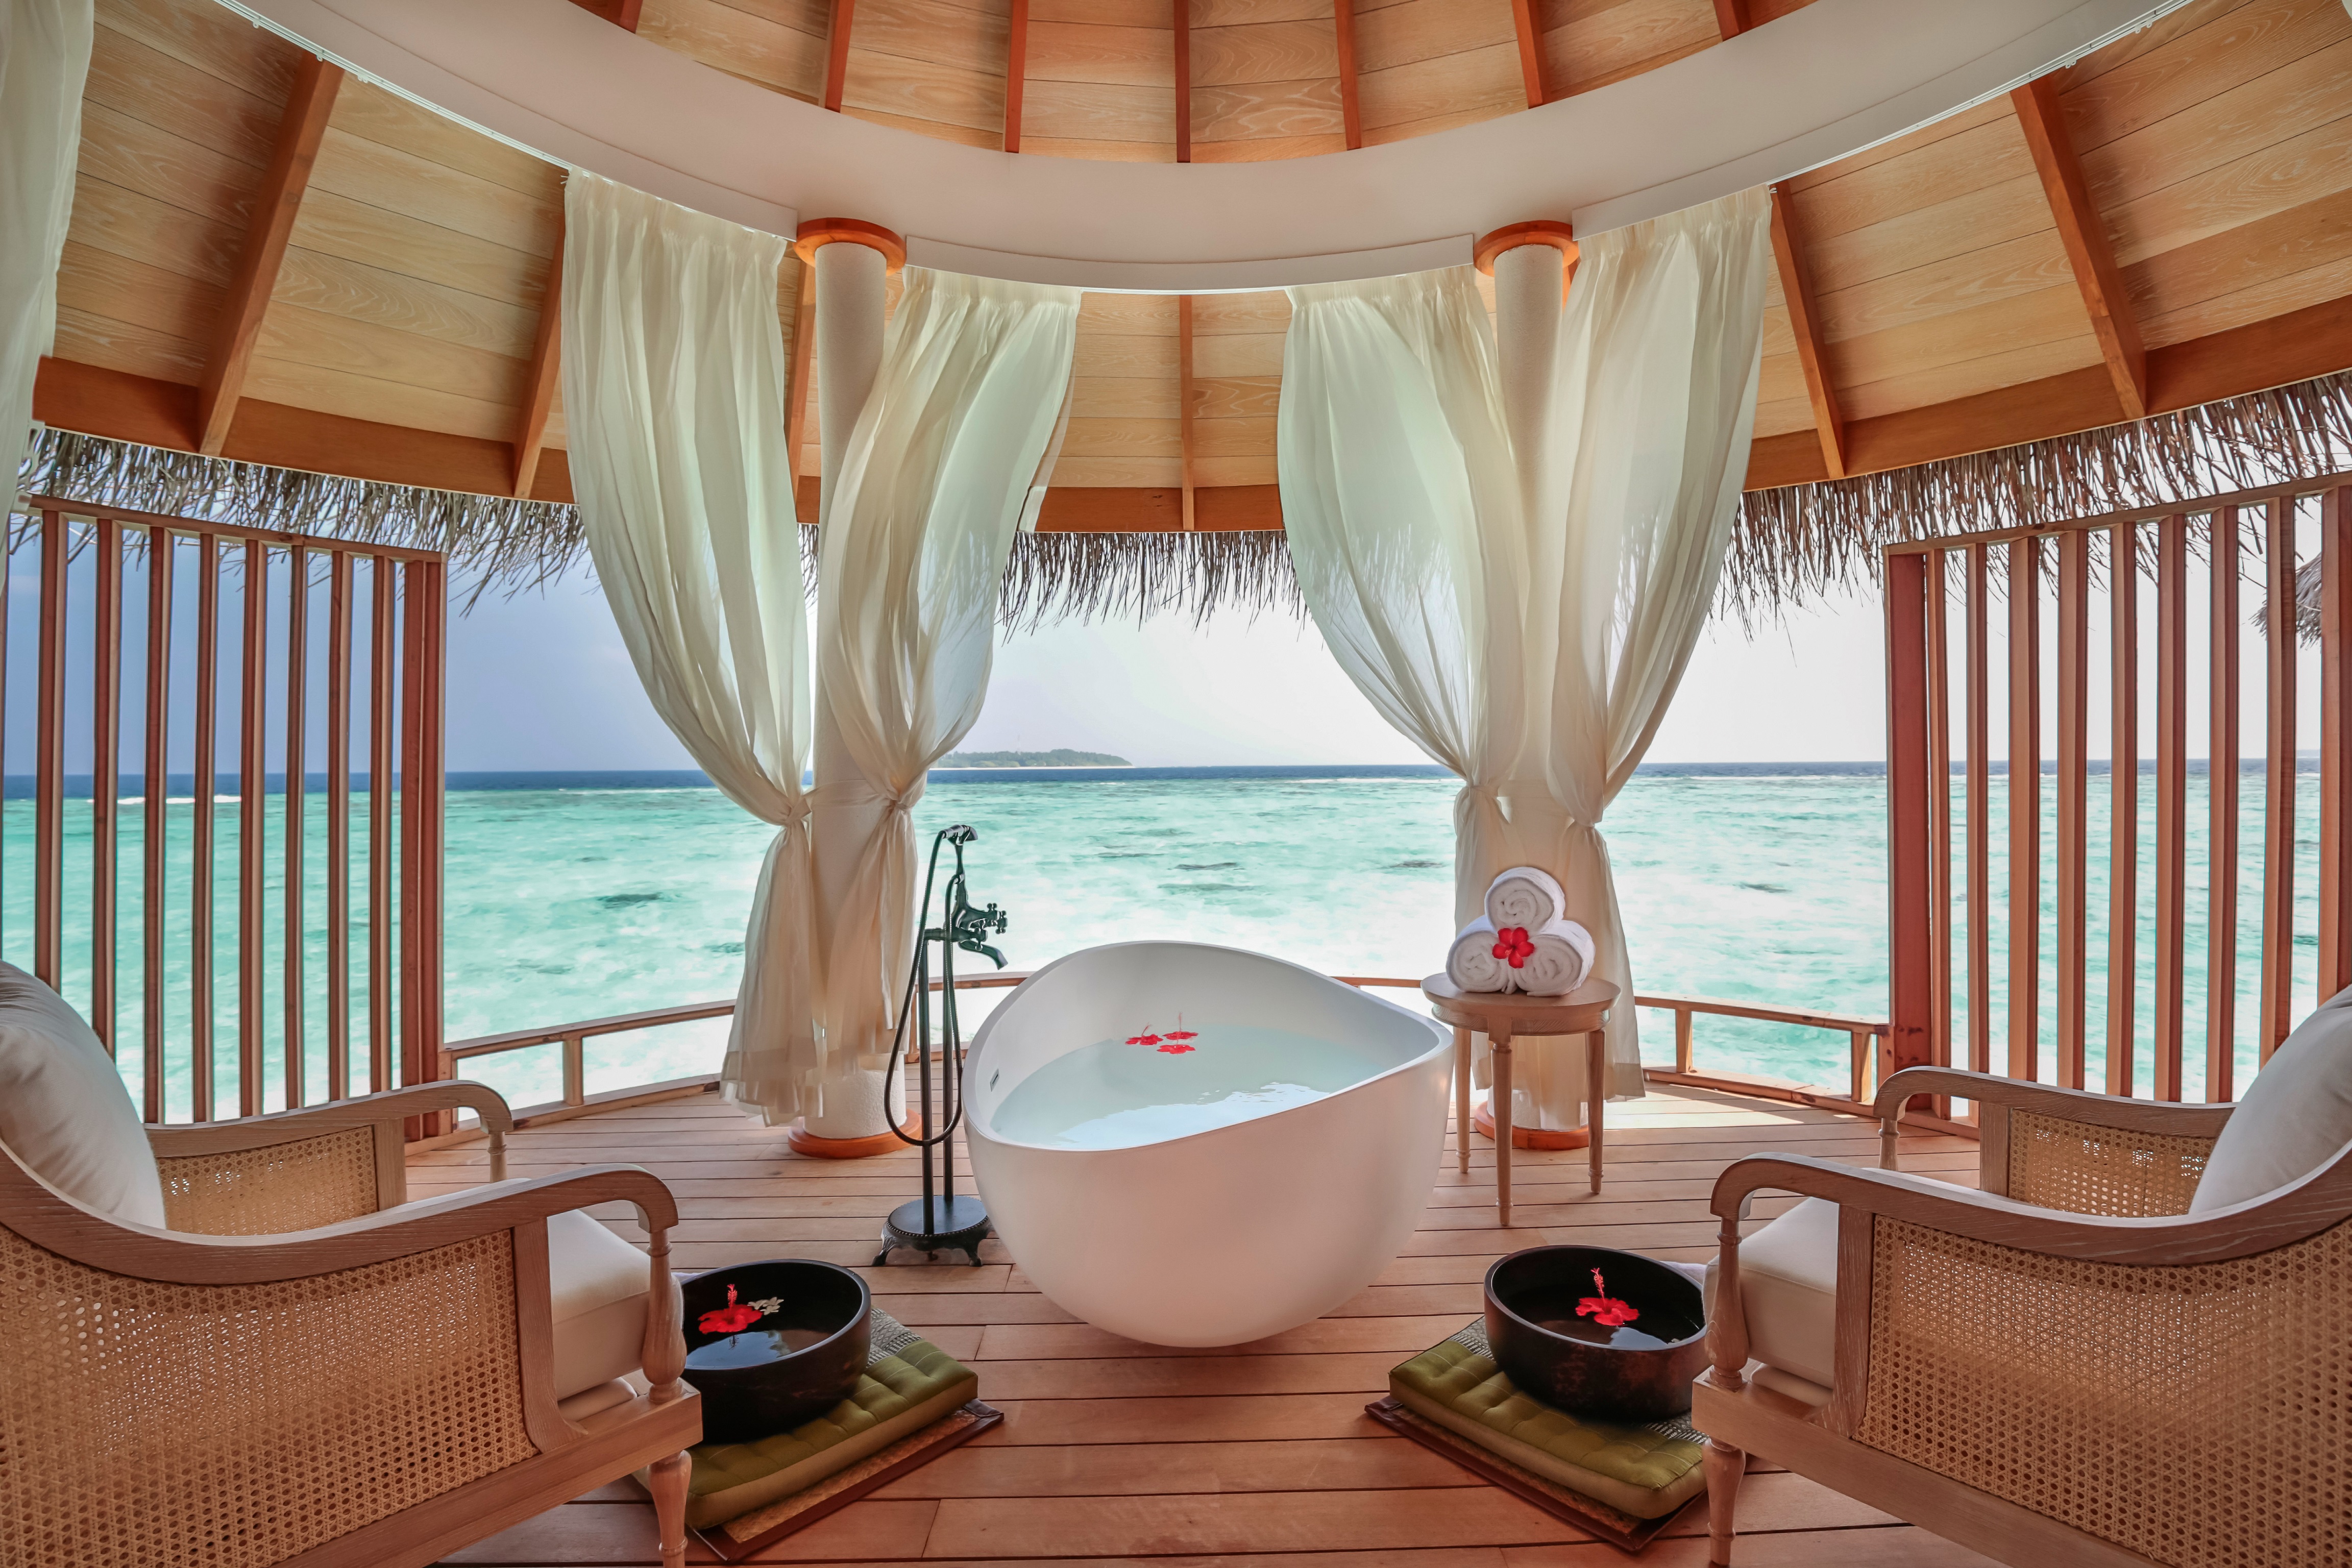 foot massage at a luxury resort in the maldives - Maldives Resort Review: Milaidhoo by popular Chicago blogger Visions of Vogue